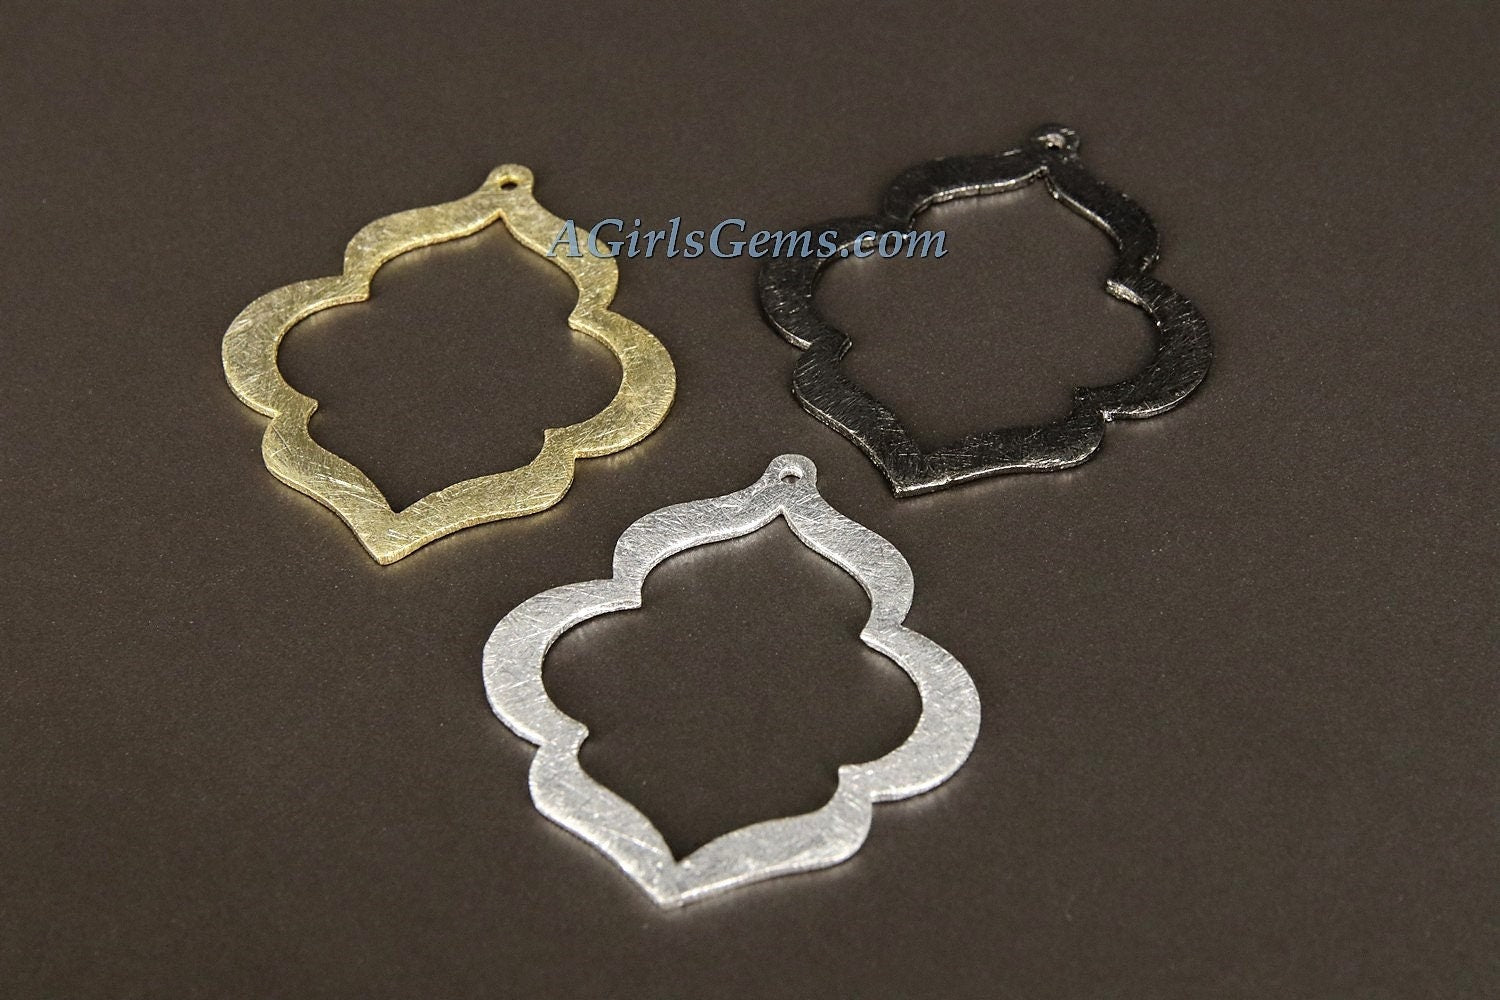 Gold Marquis Teardrop Charm, Brushed Soldered 32 x 40 mm Flat Ring Charms Keyhole/Scallop Pendant, Earrings/Necklace Jewelry Making